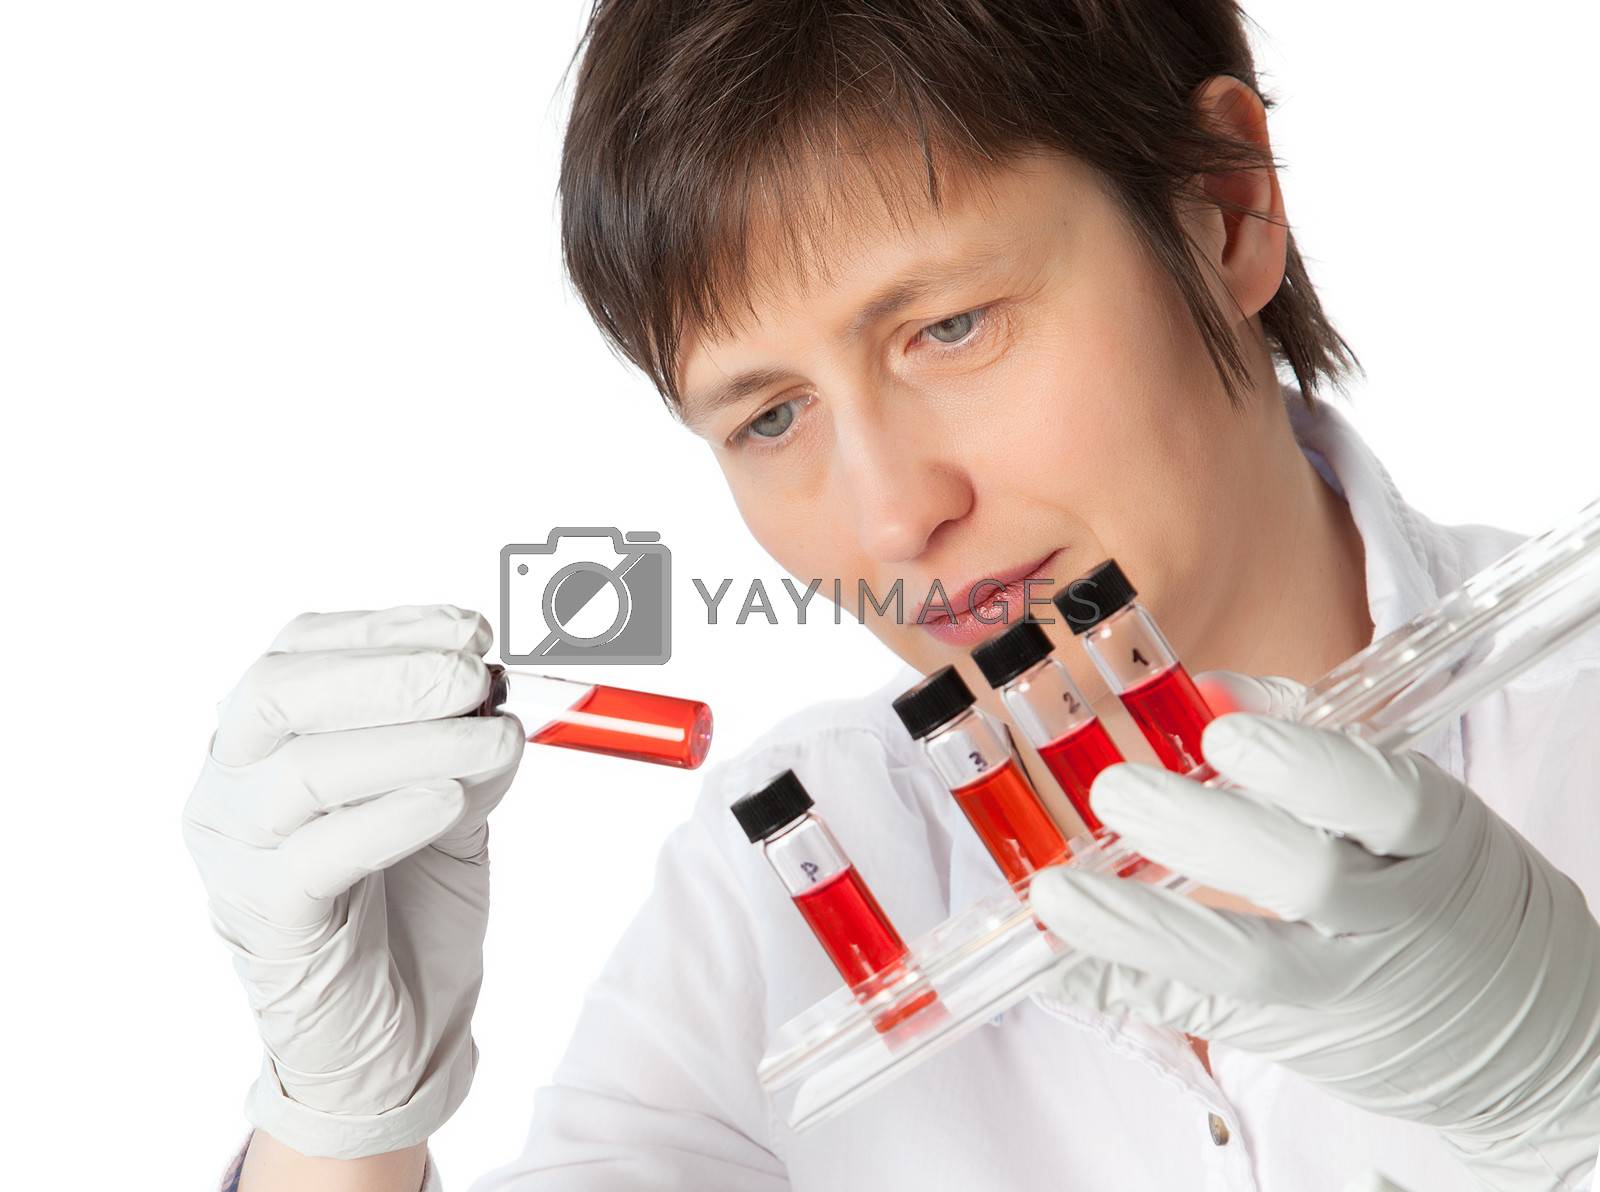 Royalty free image of Isolated scientist woman in lab coat with  liquid samples. by motorolka